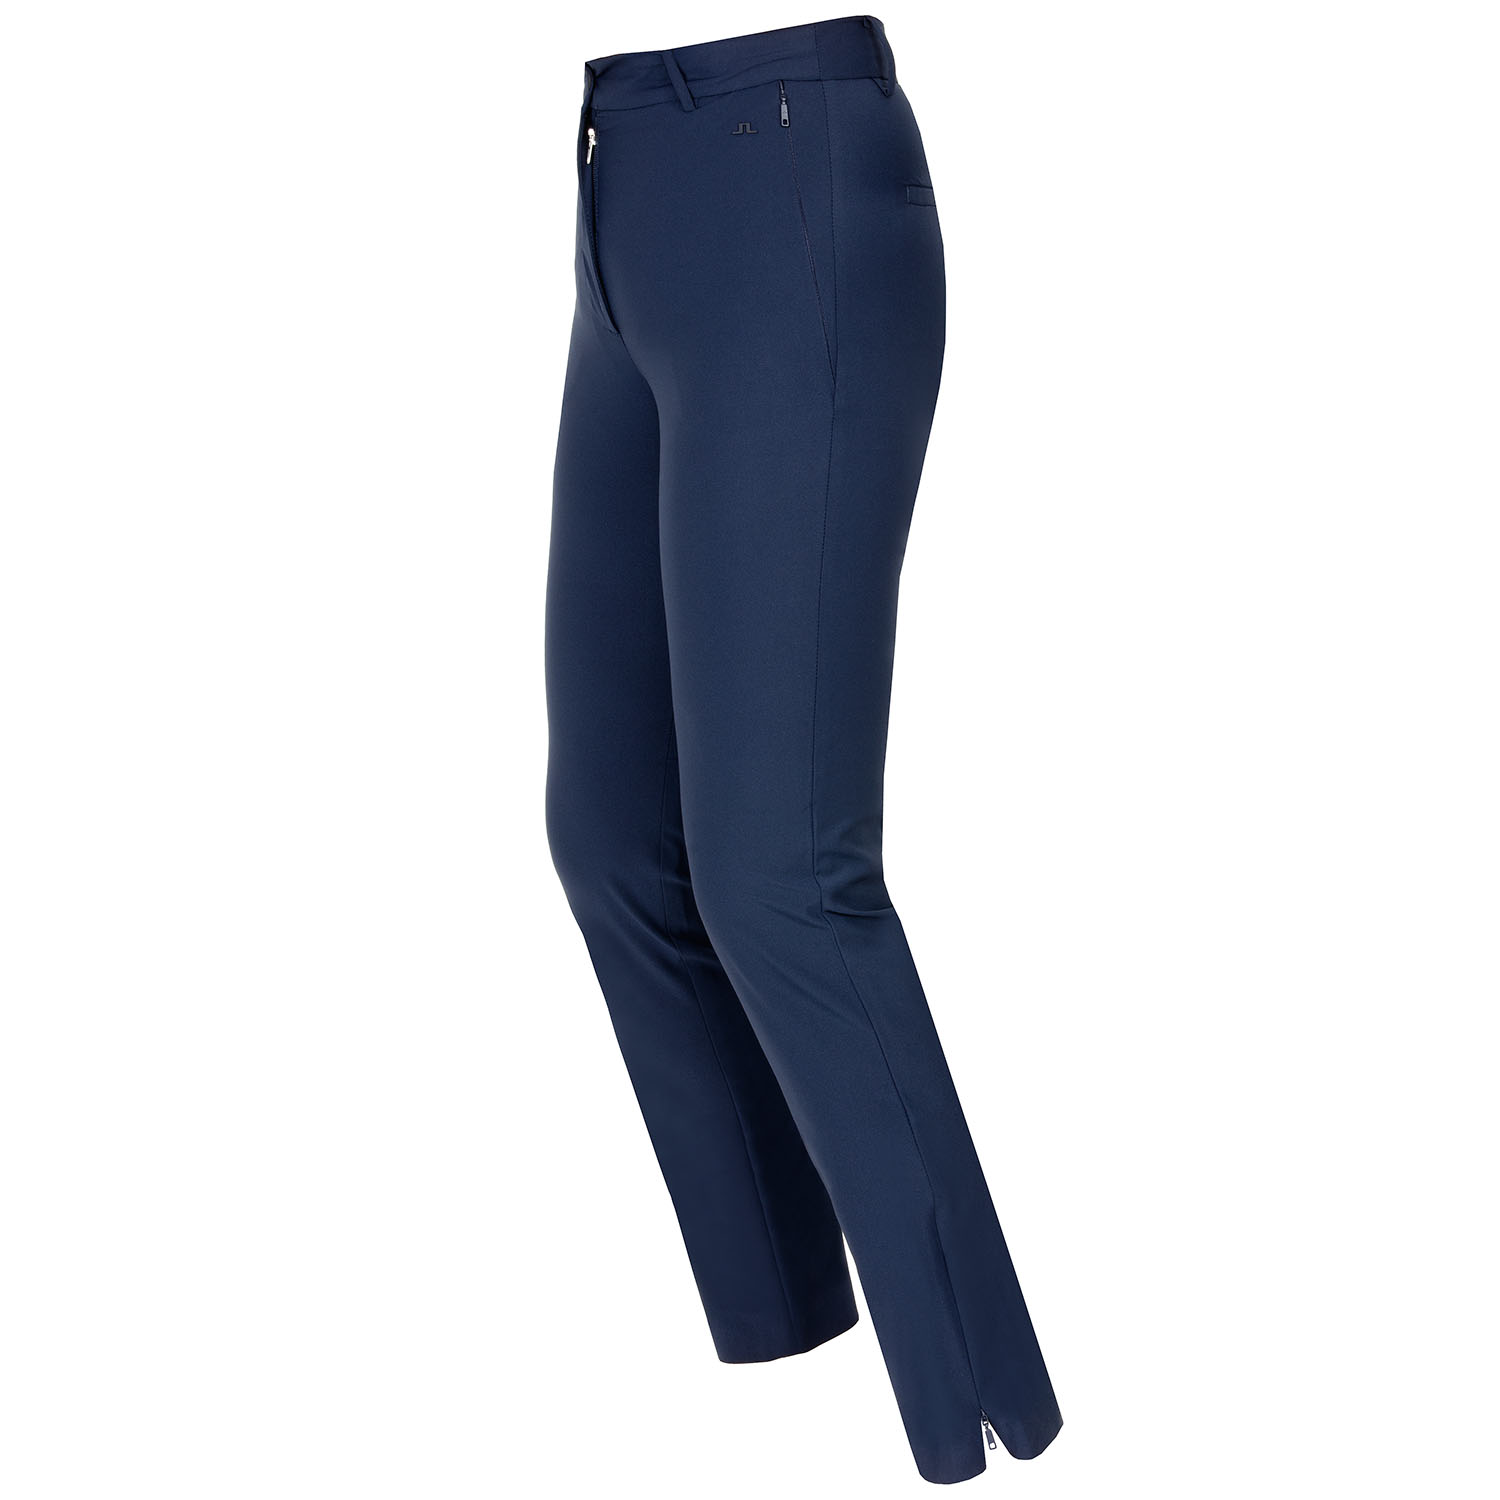 J Lindeberg Pia Micro Stretch Ladies Golf Trousers